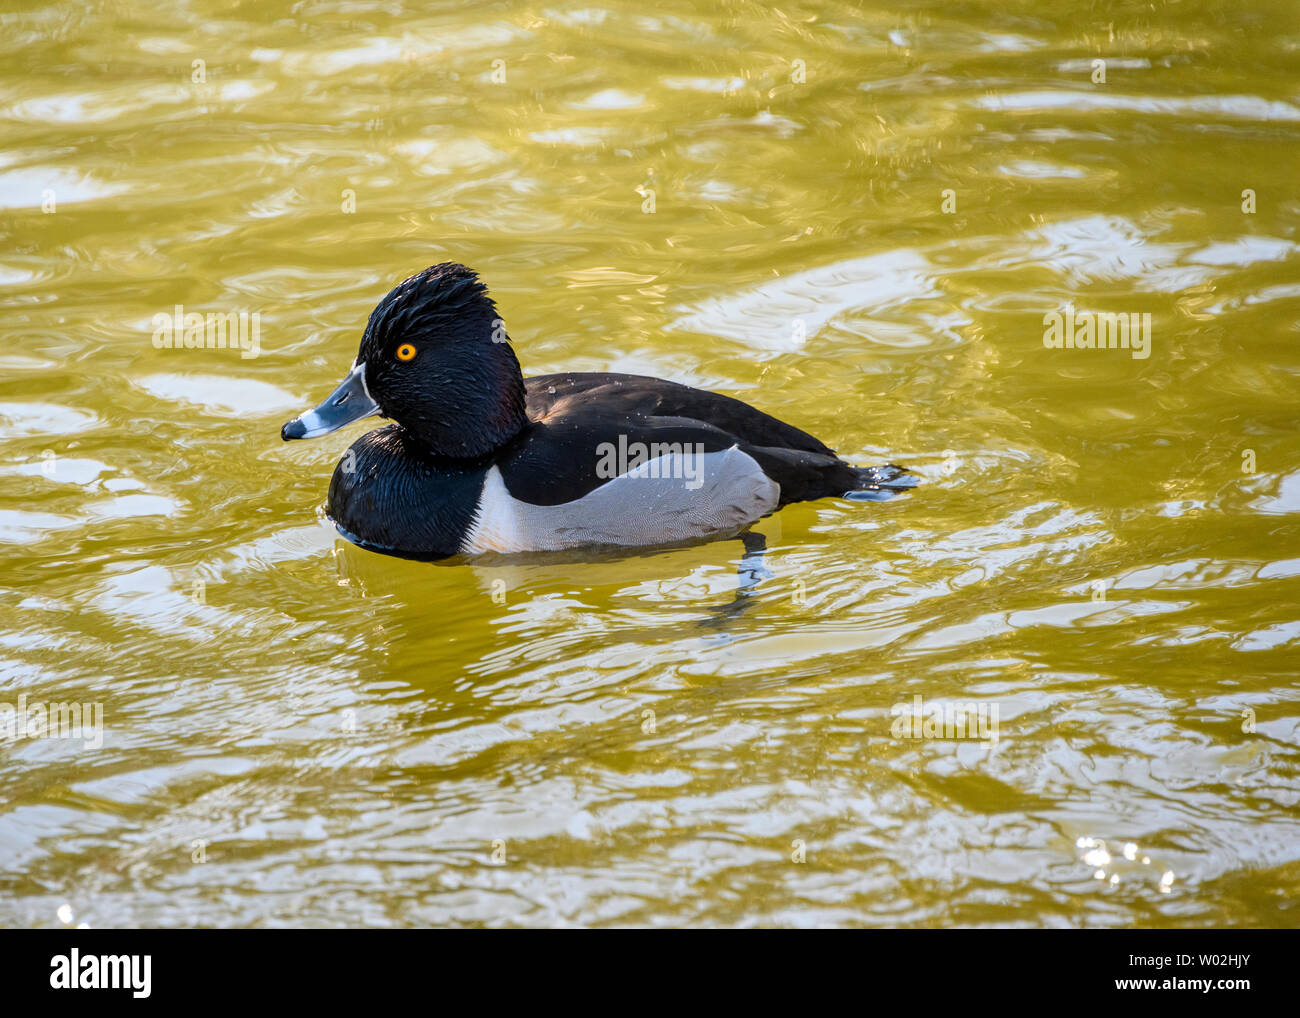 Beautiful ring necked male duck swimming in the lake. Black and grey bird. Grey, striped bill and intense yellow eyes. Red ring around neck. Sunny Stock Photo